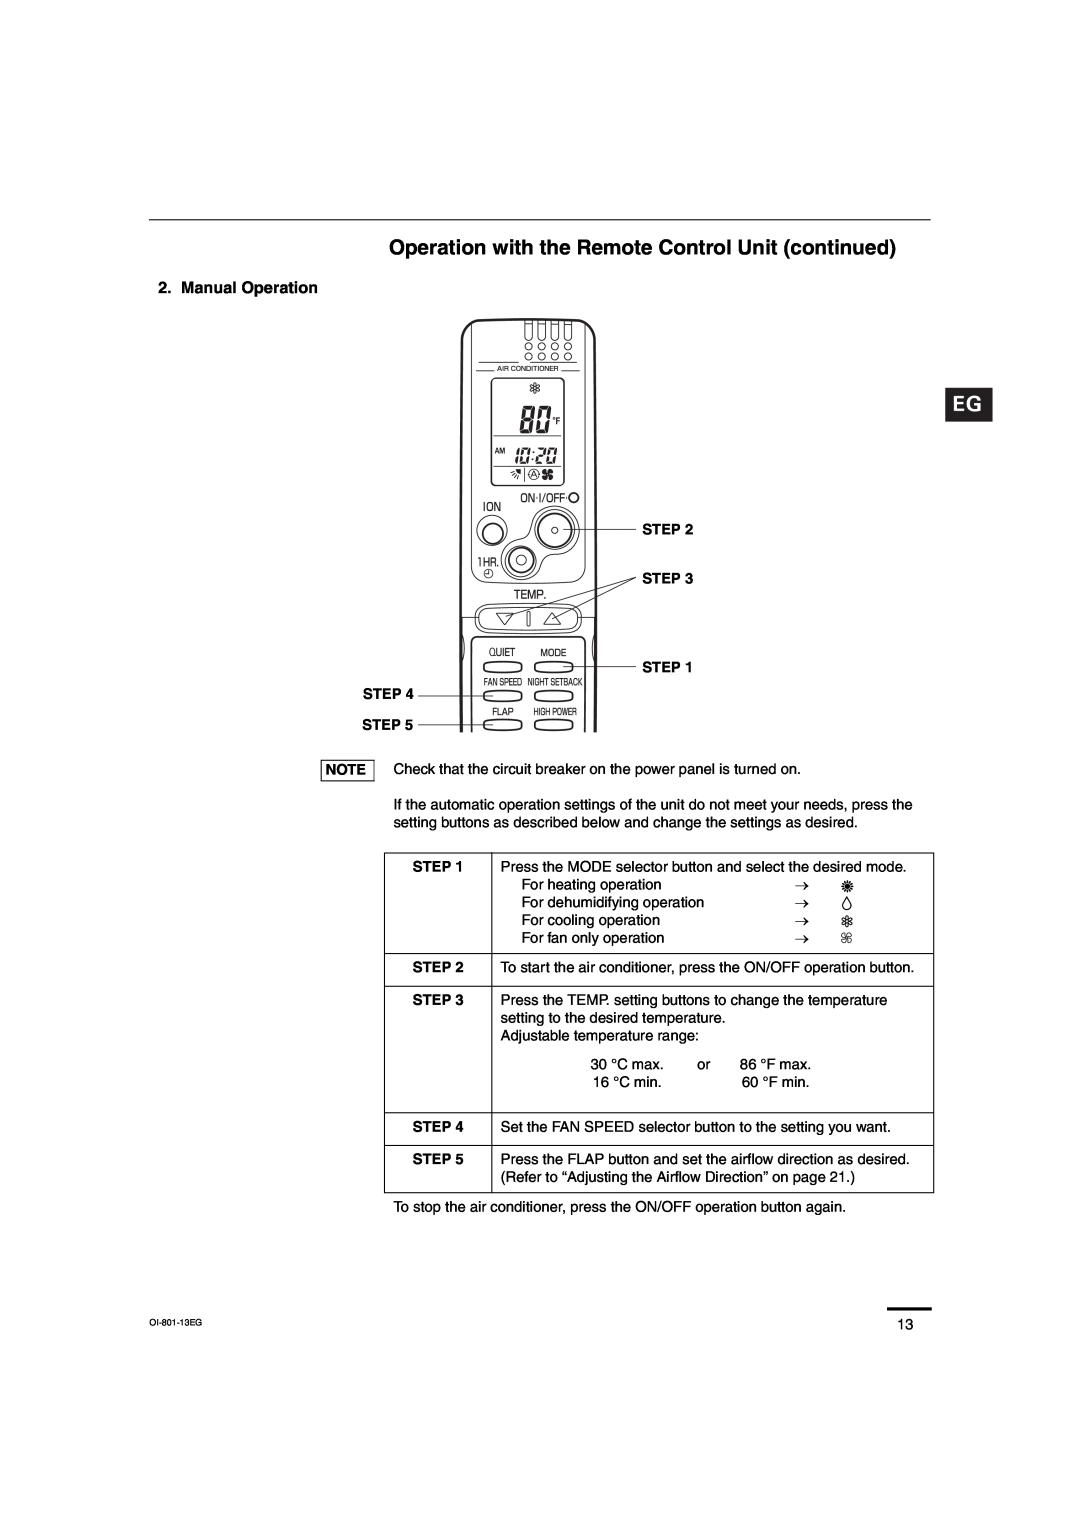 Sanyo CH1872, CH2472 service manual Operation with the Remote Control Unit continued, Manual Operation 